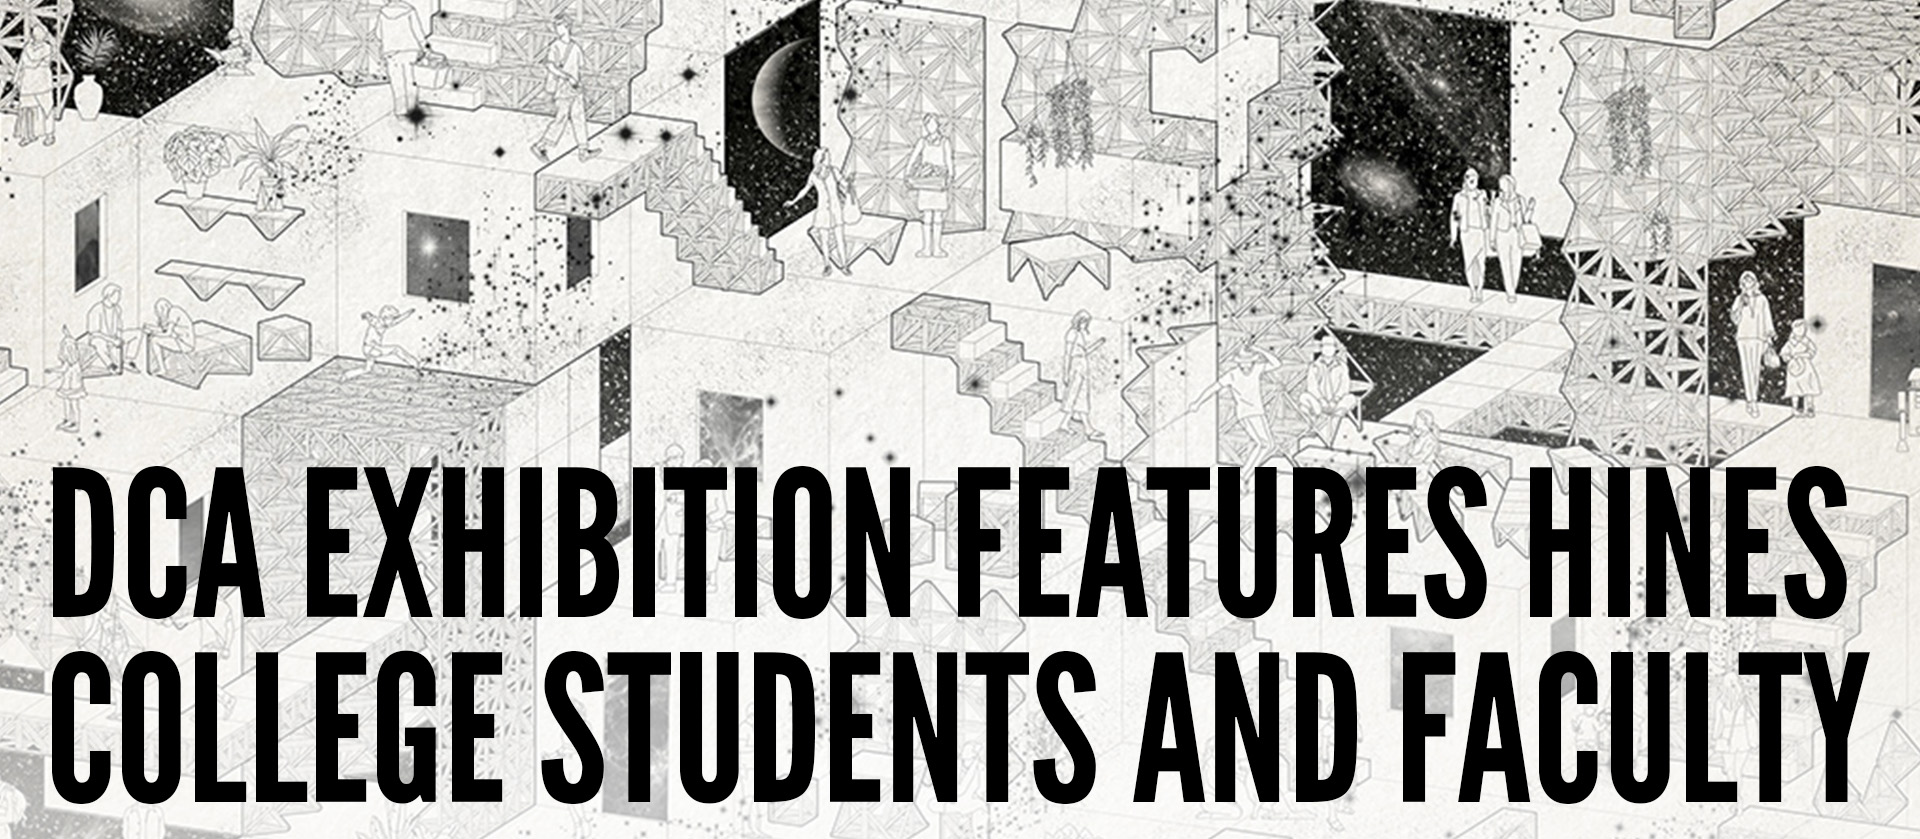 Design Communication Association Features Hines College Students and Faculty for Annual Exhibition and Conference